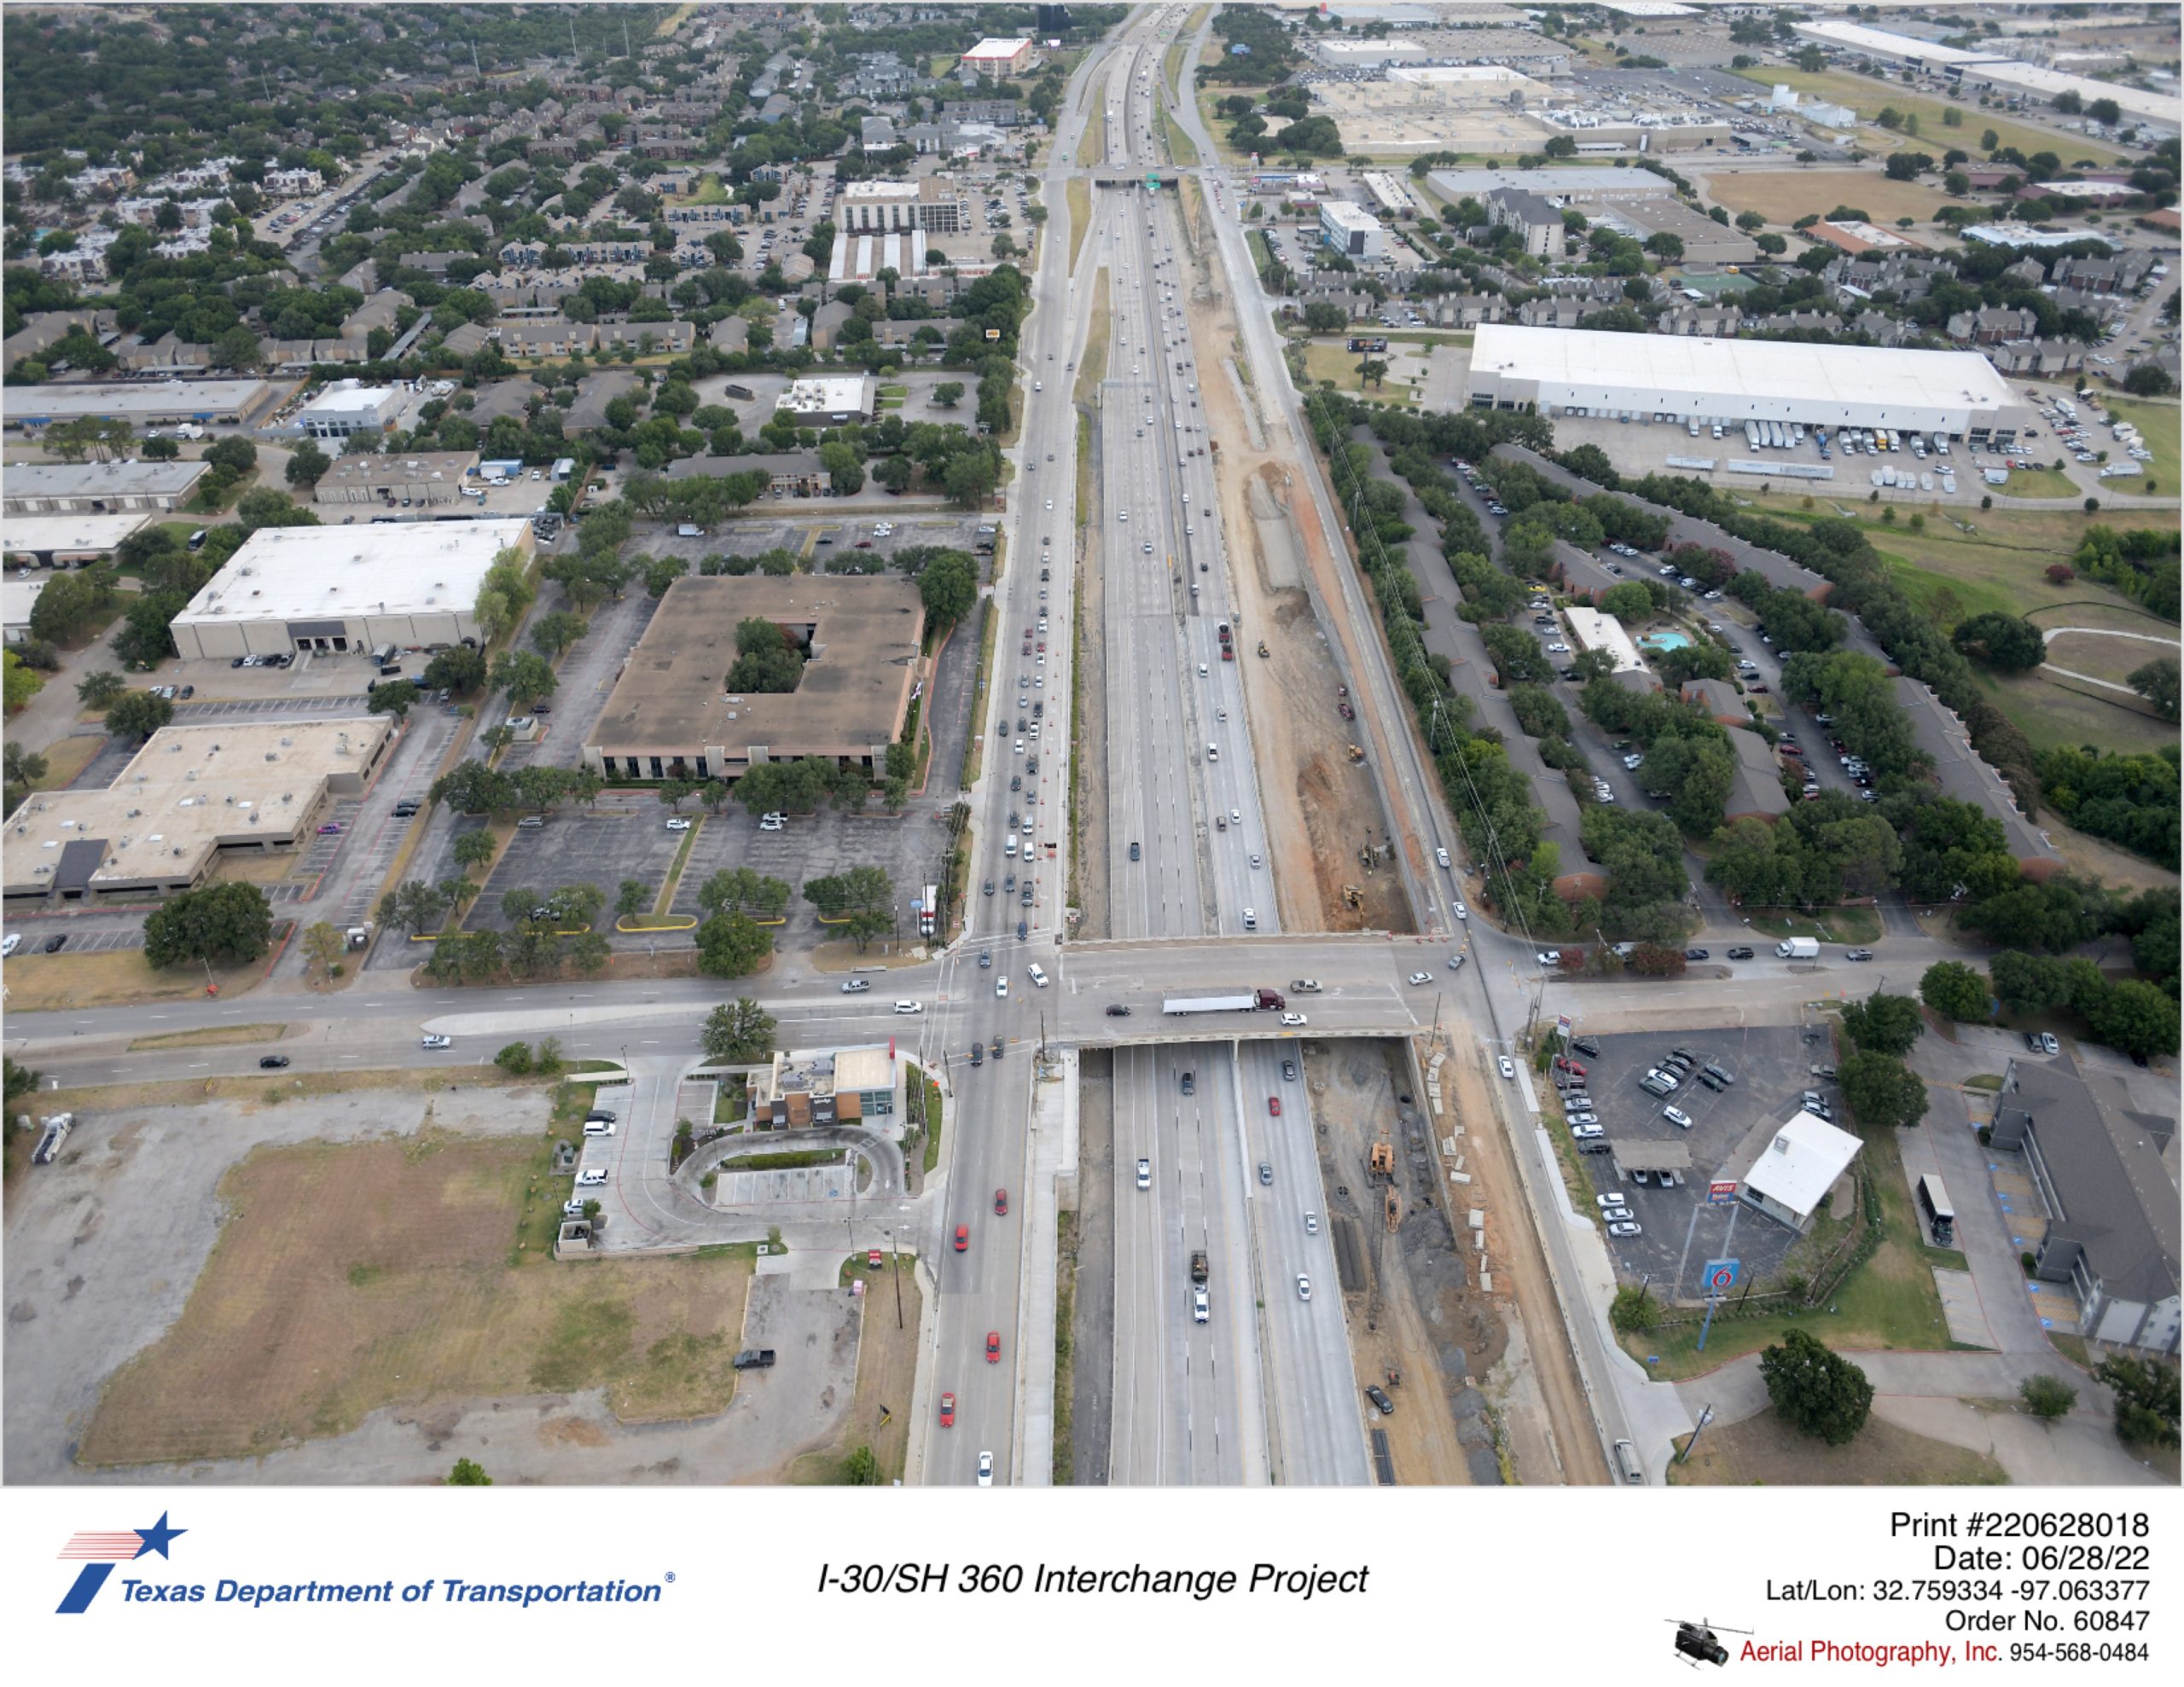 SH 360 looking north over Ave J interchange. Construction of northbound frontage road is shown.